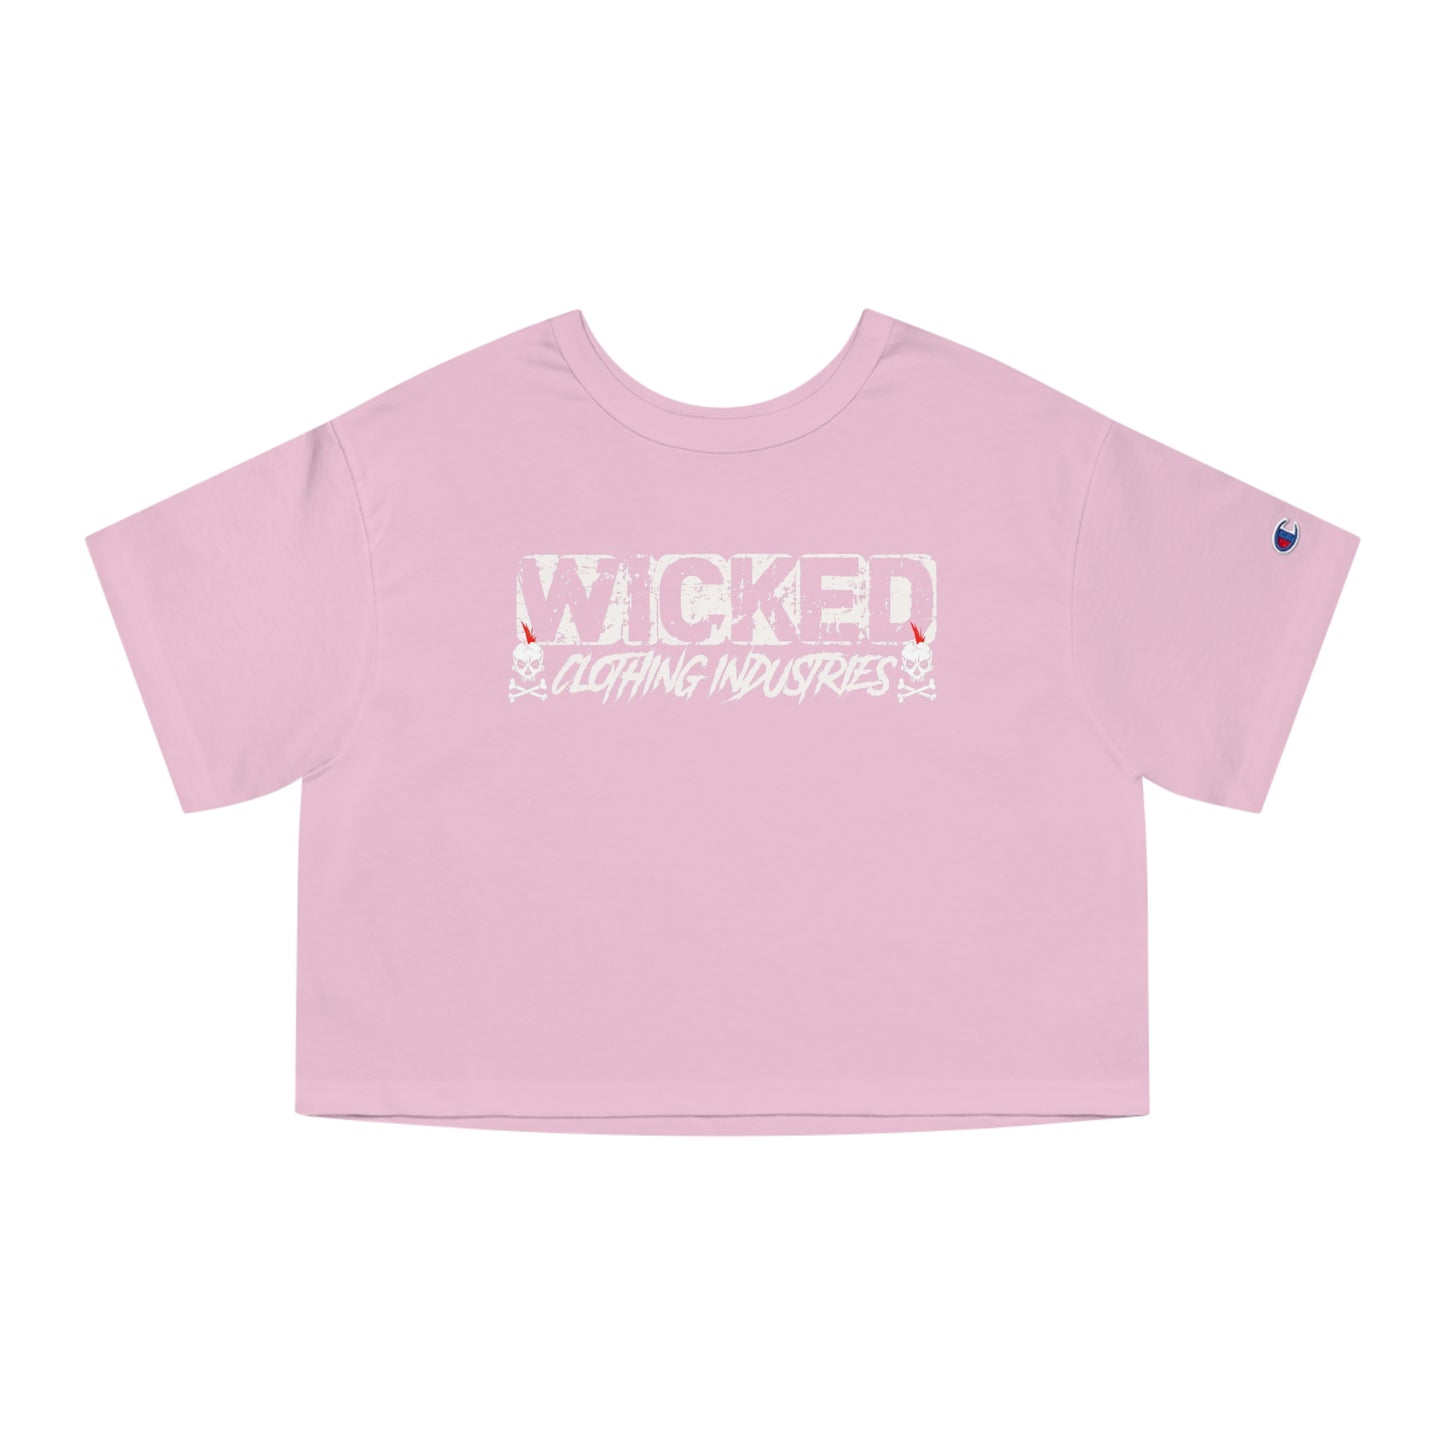 Wicked Punk Rock 2  Cropped T-Shirt